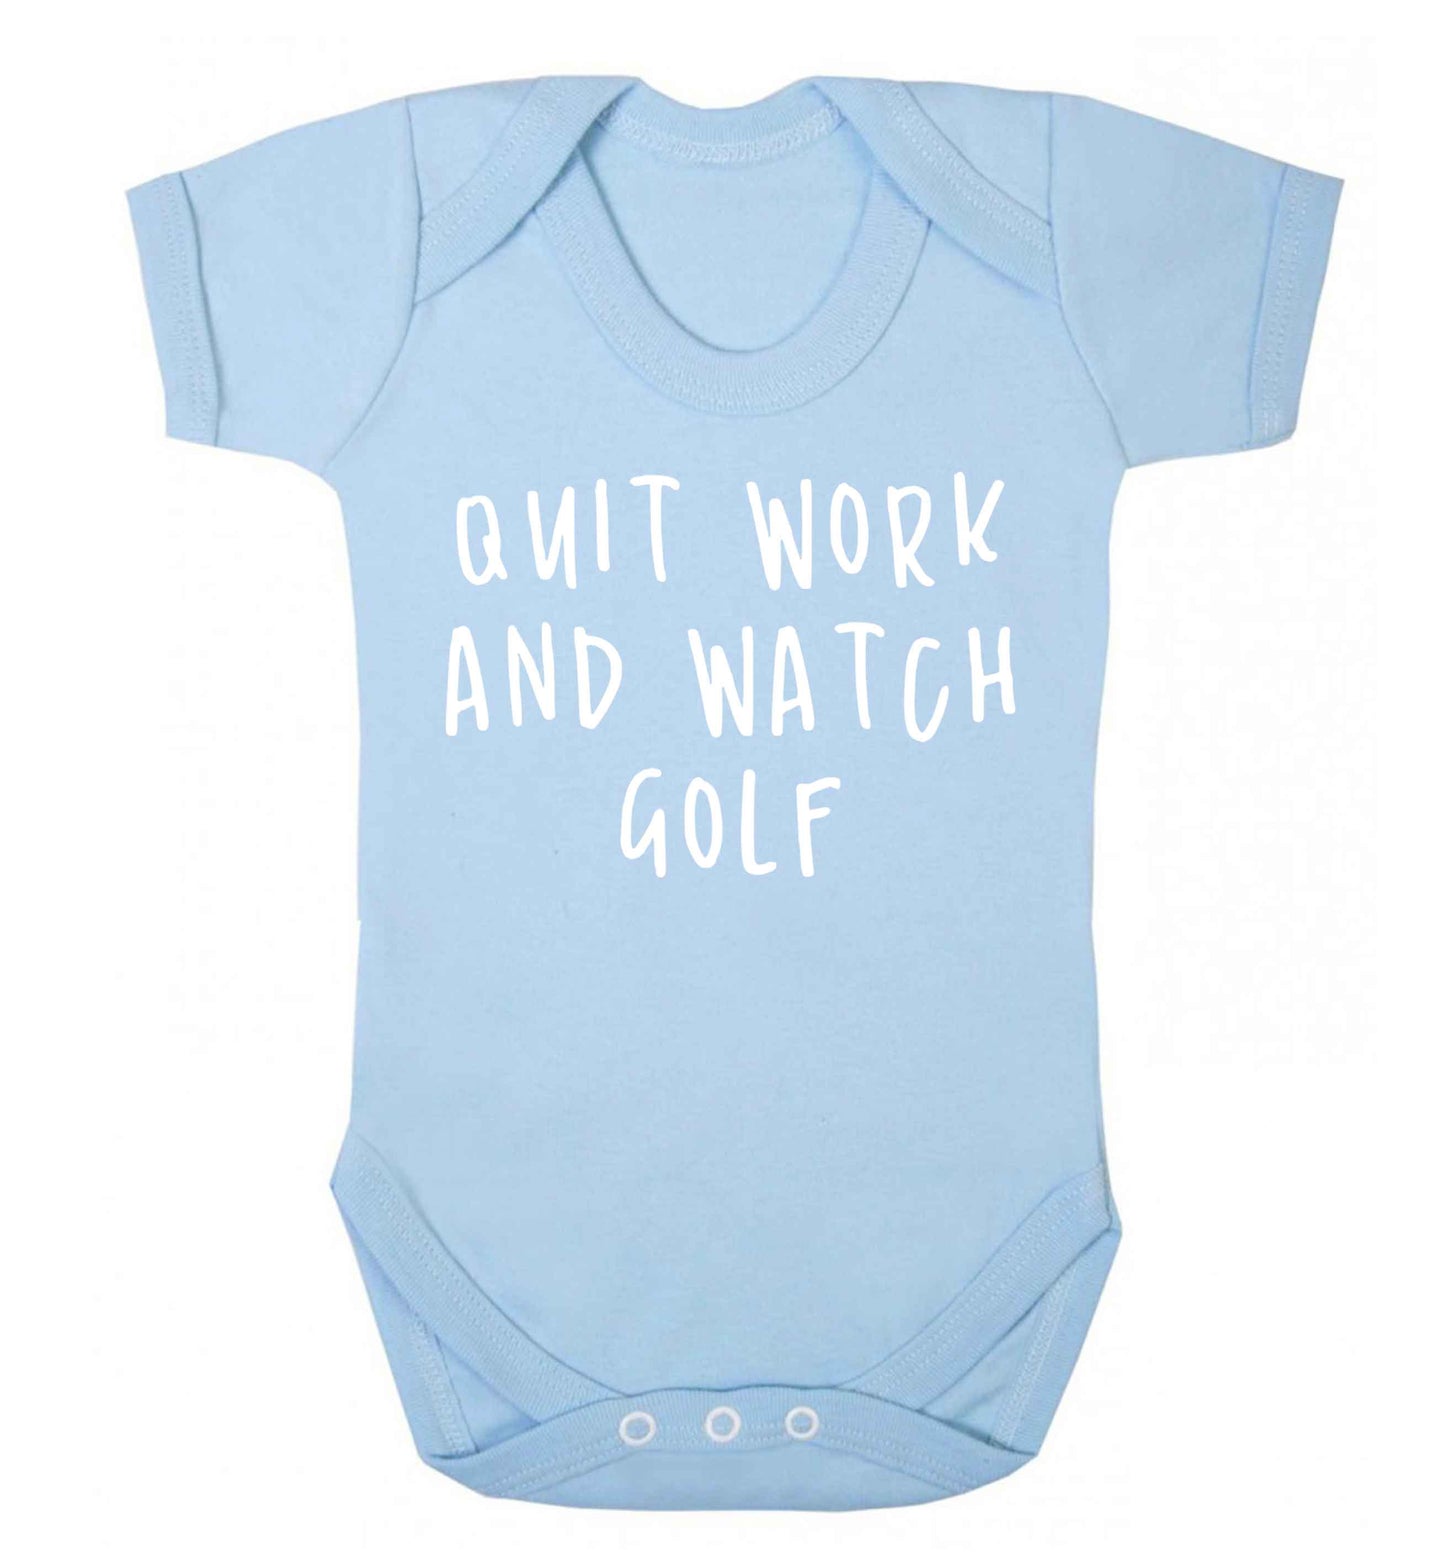 Quit work and watch golf Baby Vest pale blue 18-24 months